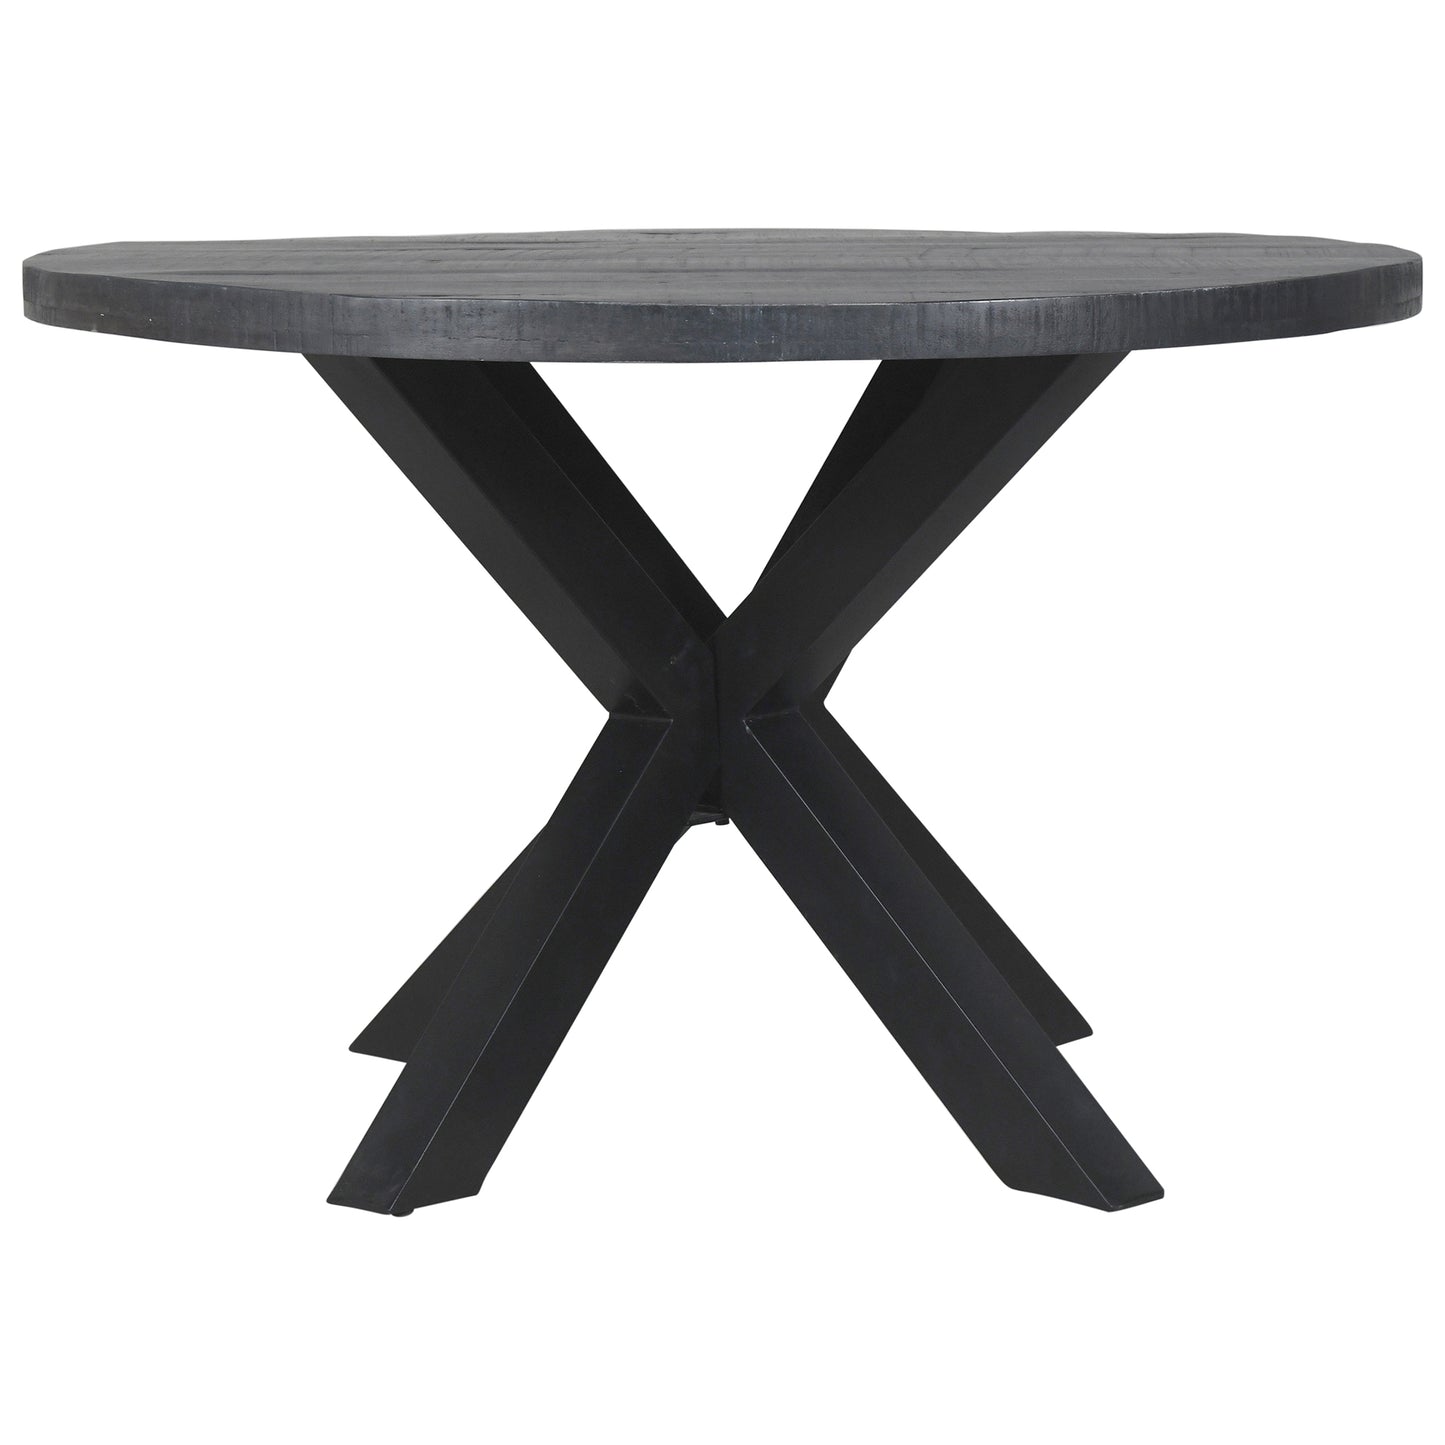 Arhan Round Dining Table in Distressed Grey and Black